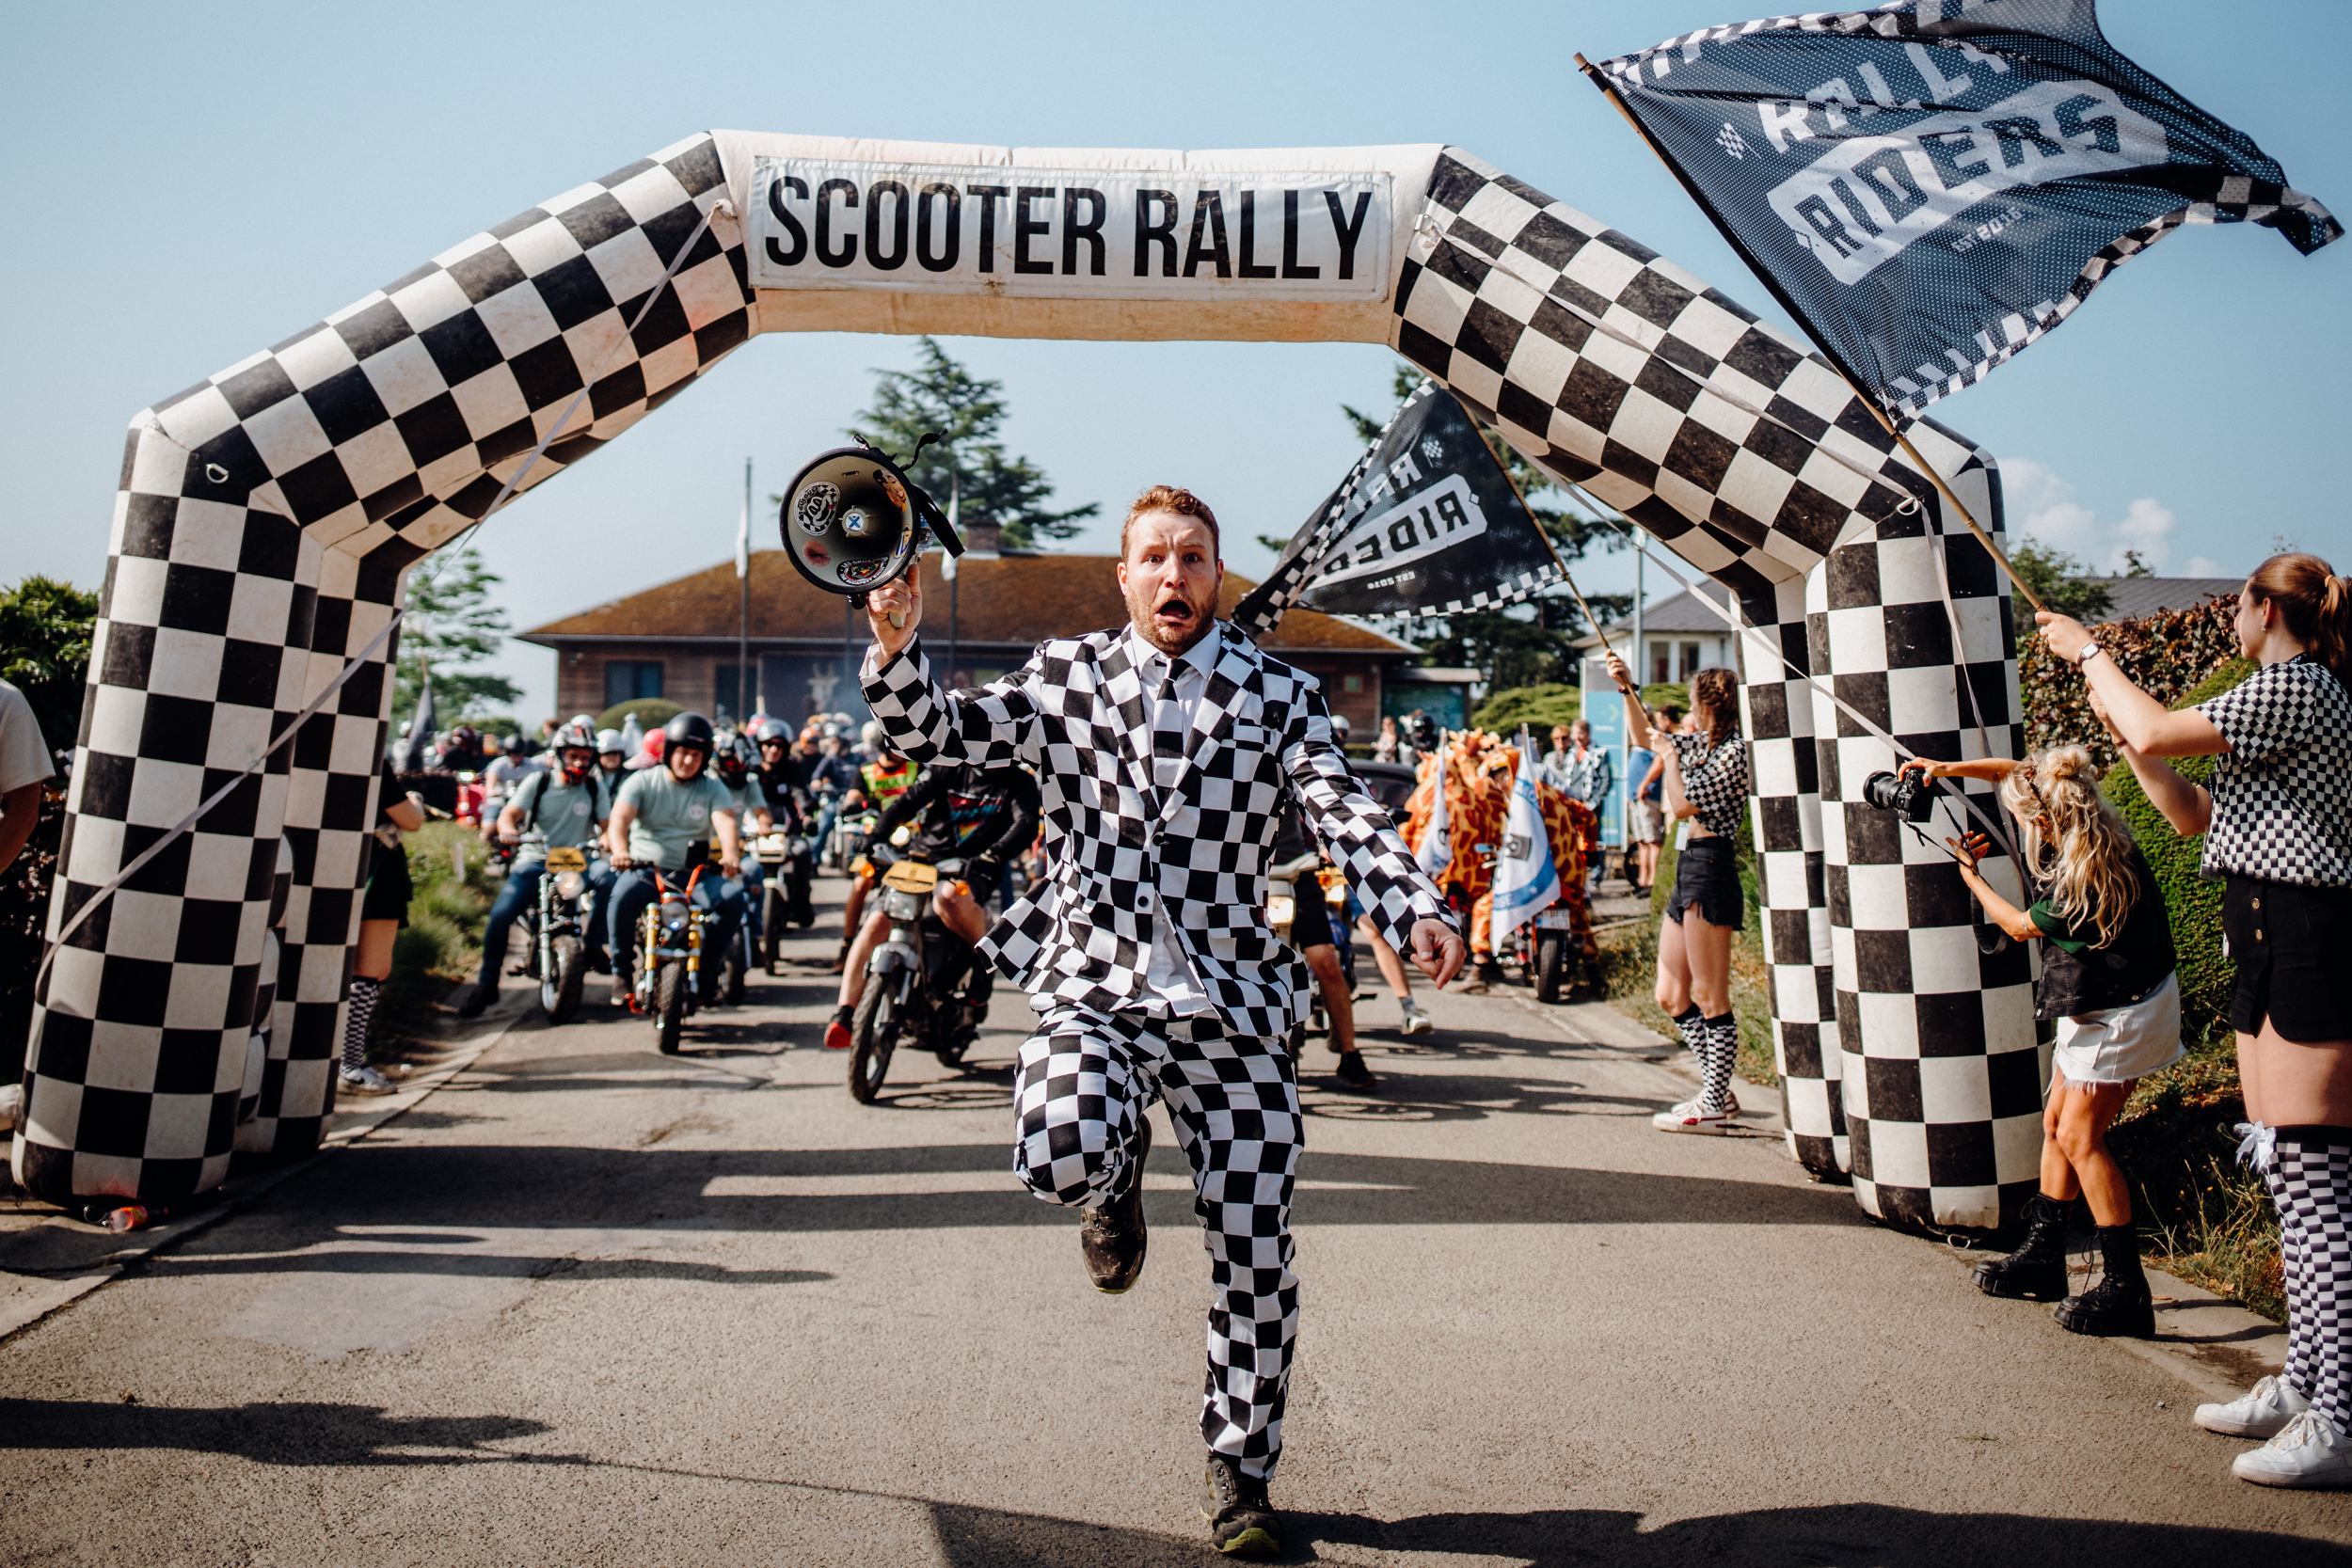 The Scooter Rally